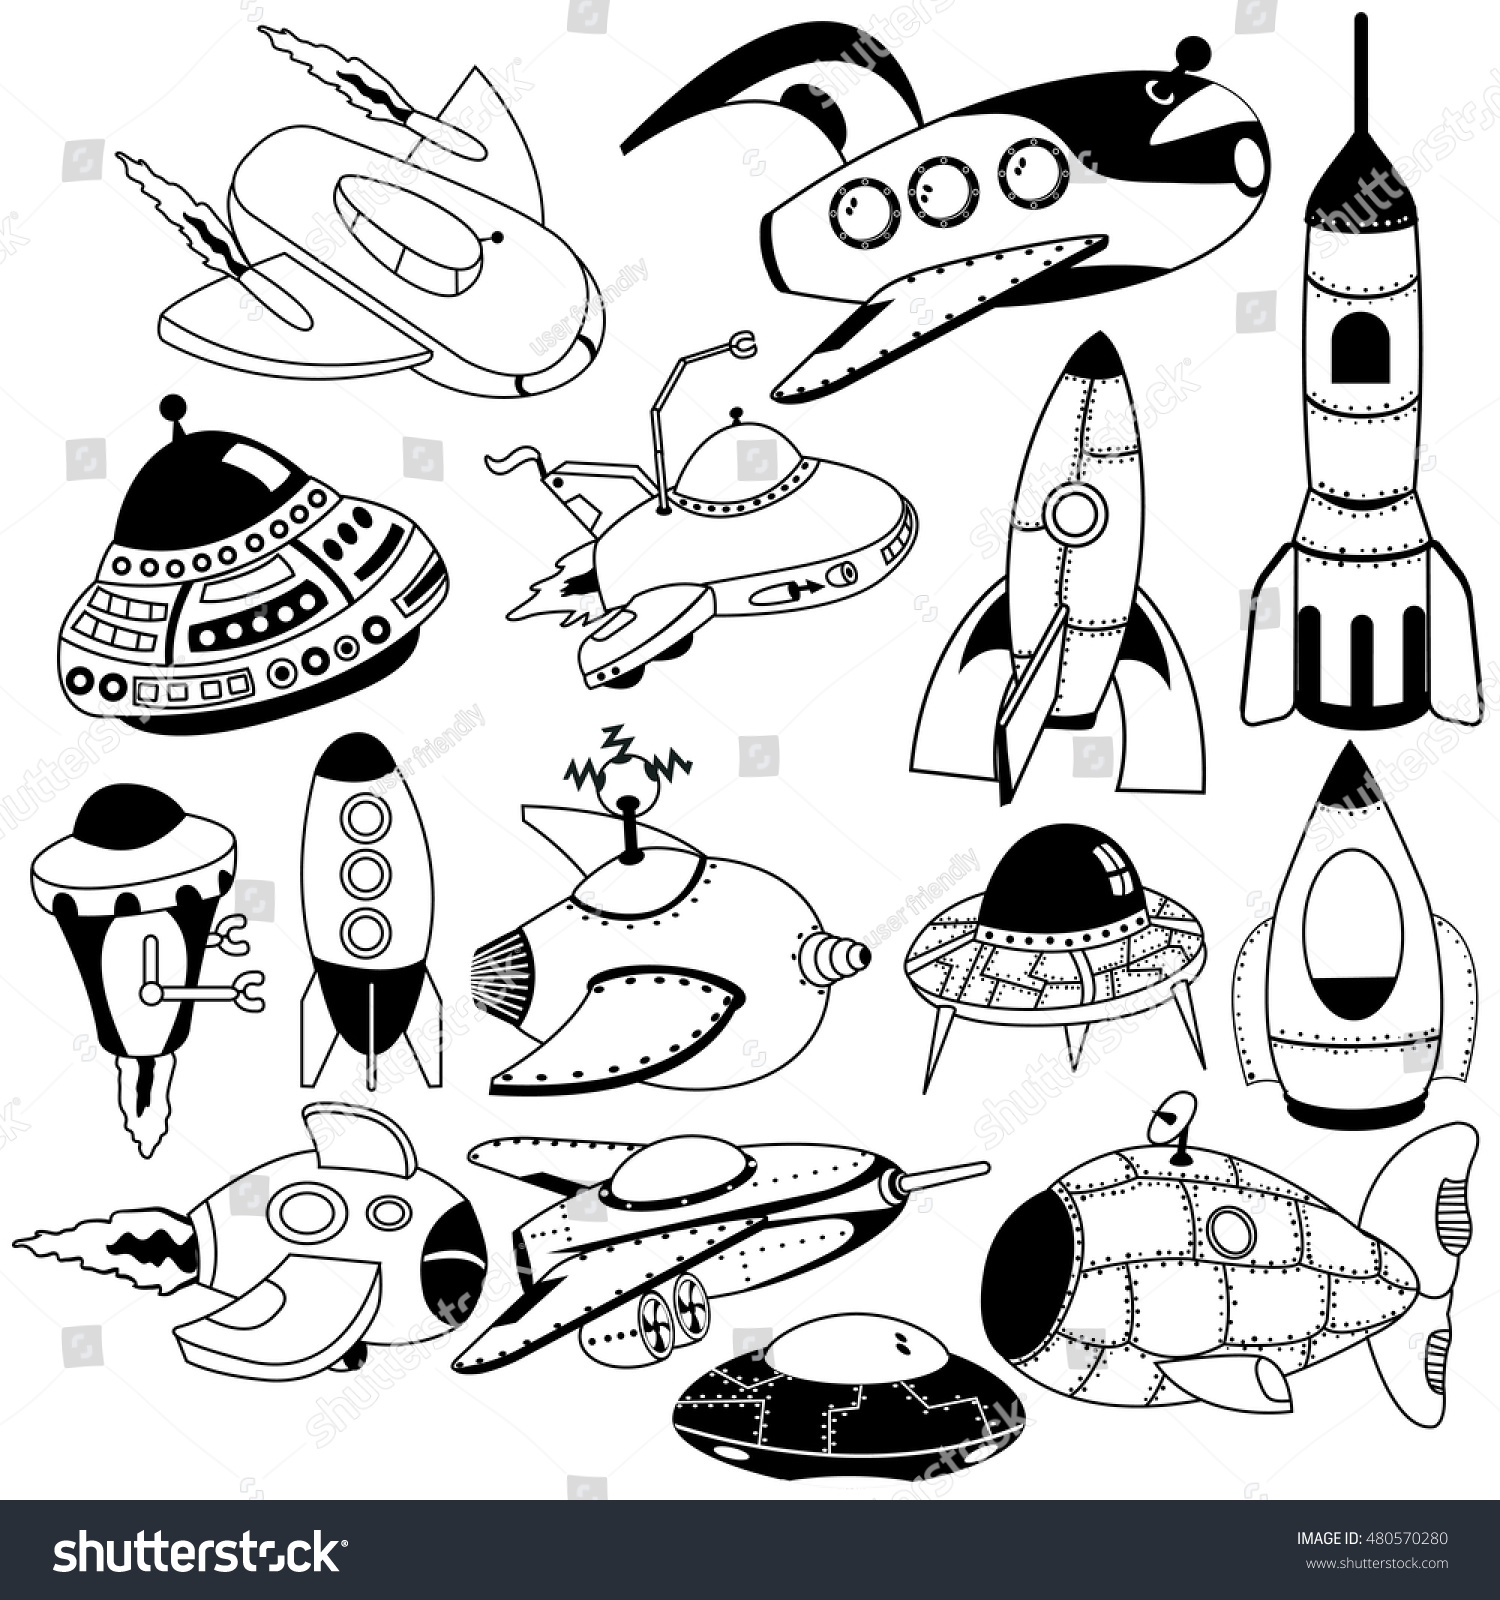 Vector Black Illustration Different Retro Space Stock Vector (Royalty ...